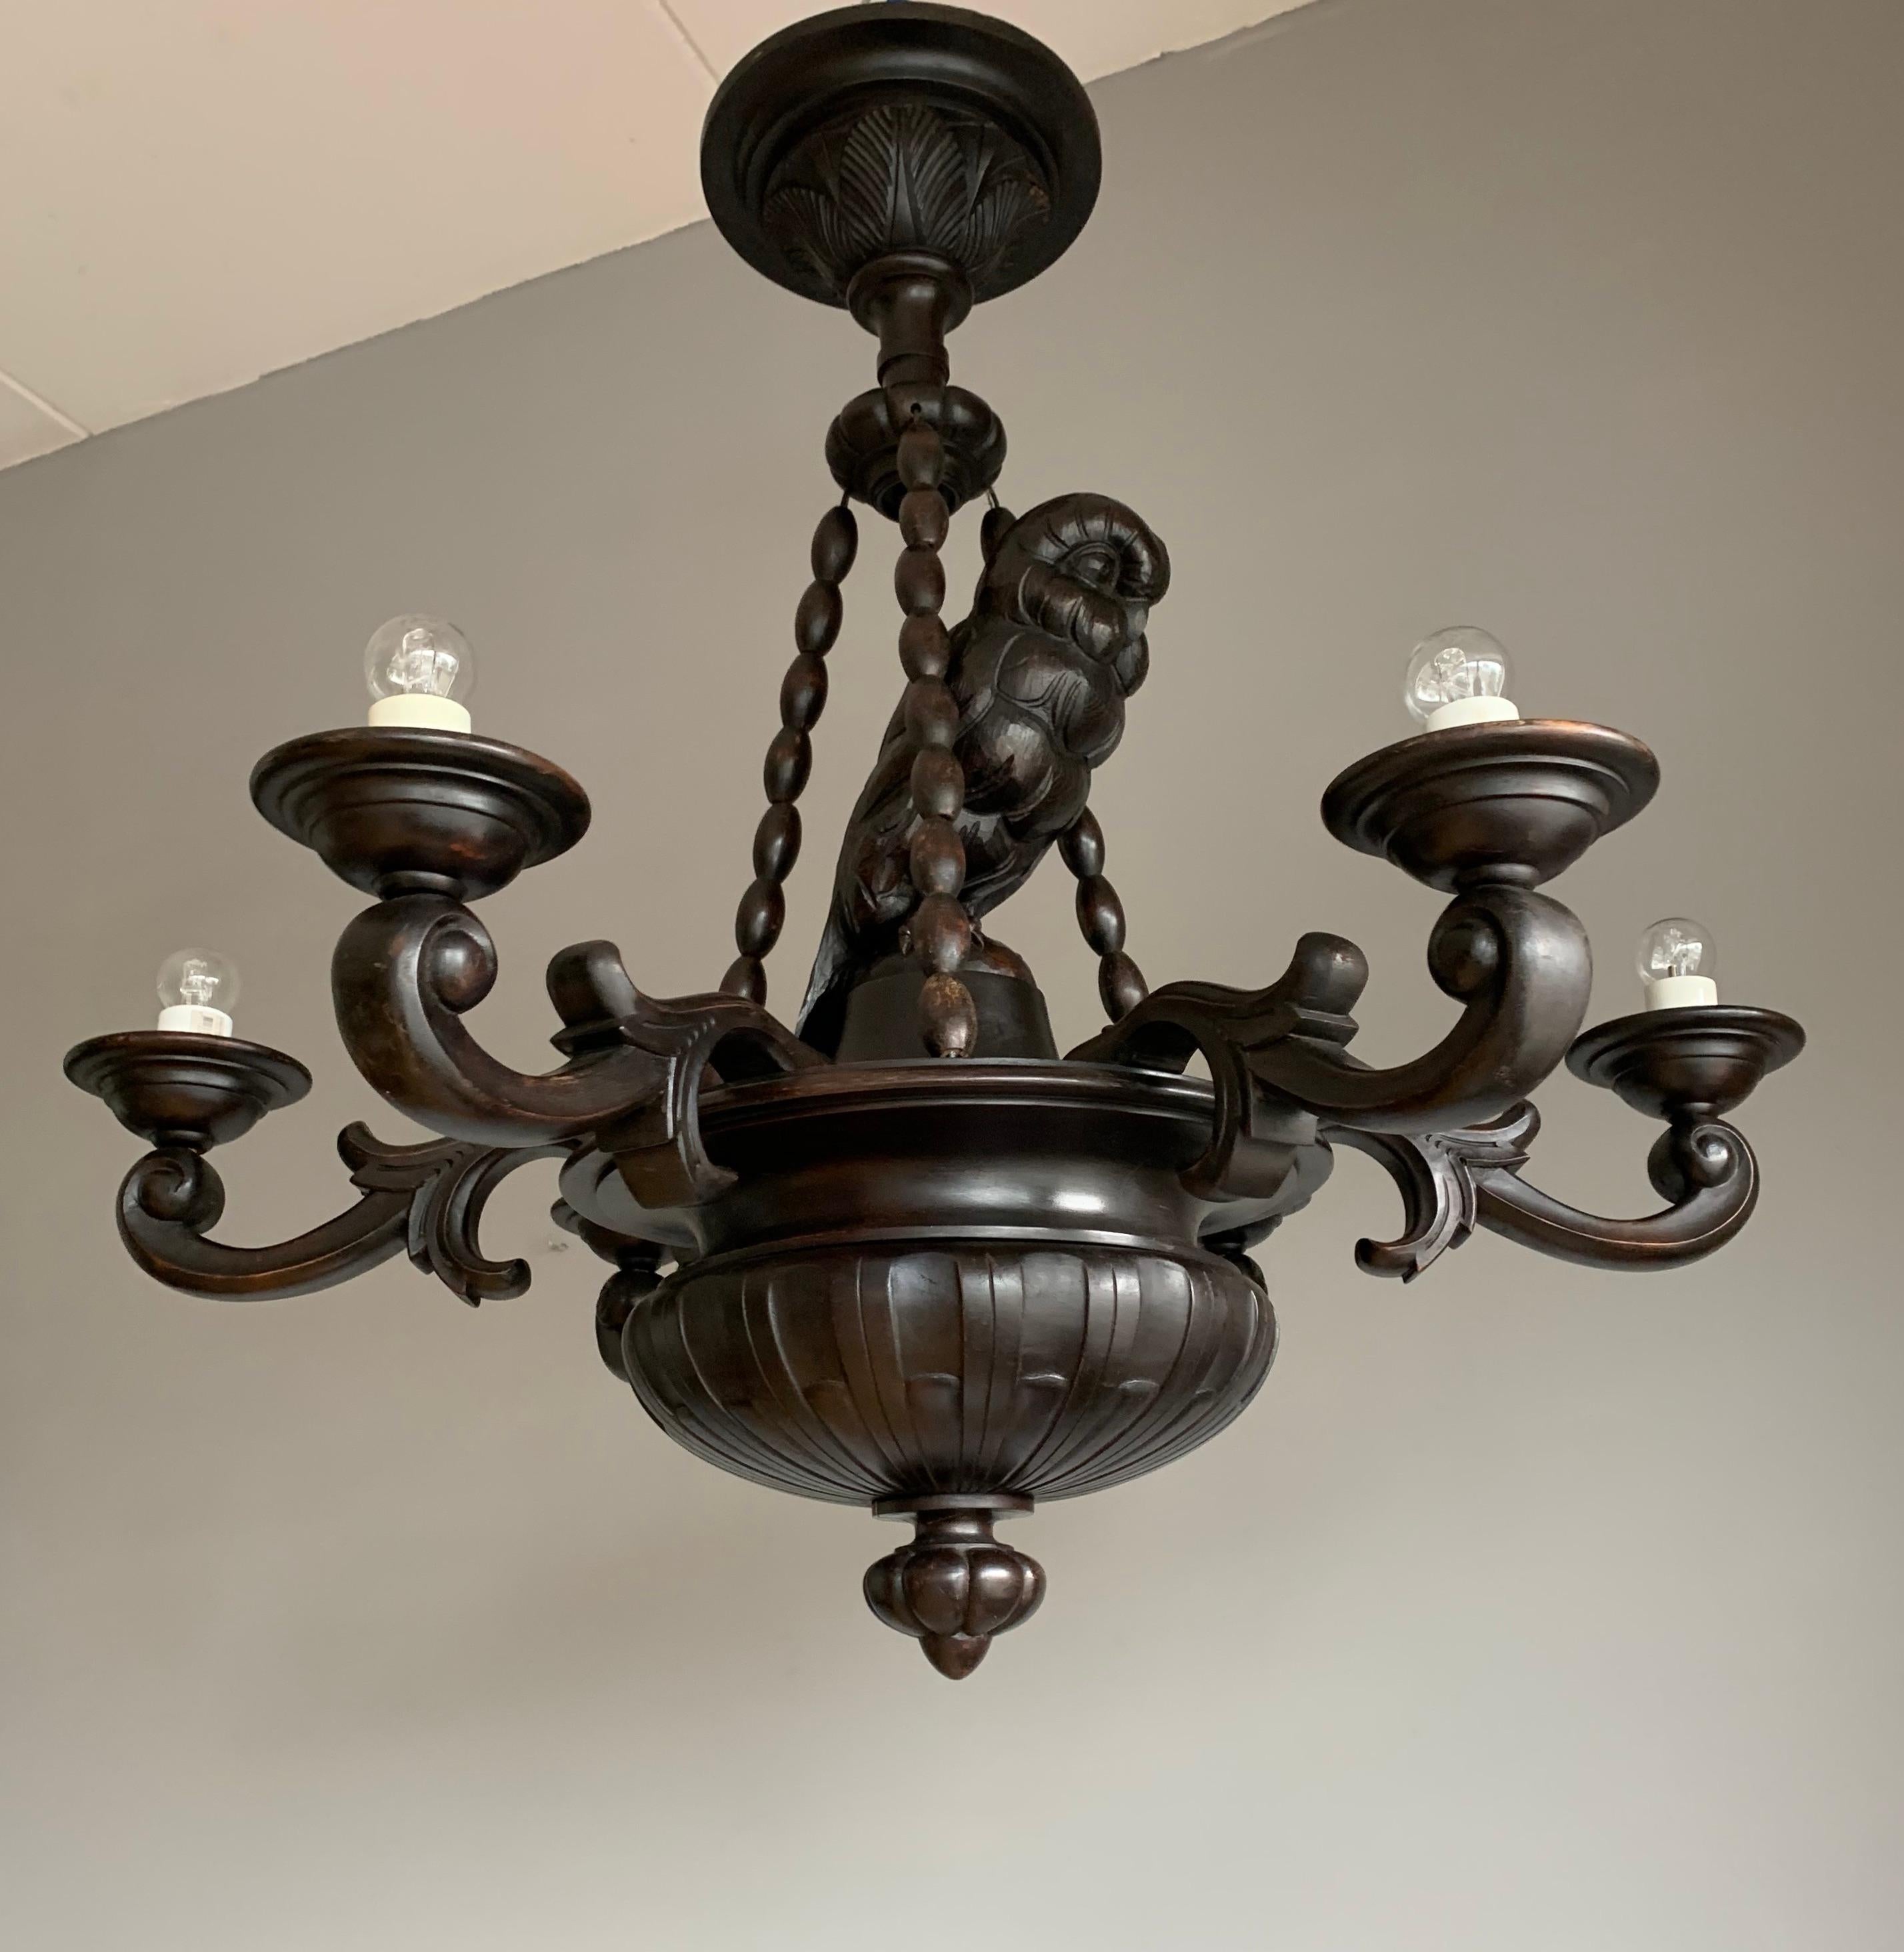 One of a kind and superb condition, extra large ( diameter 38.6 inches) pendant light.

If you have a passion for sculptural and meaningful Art then this antique and fully hand carved owl chandelier could be flying your way soon (no pun intended).